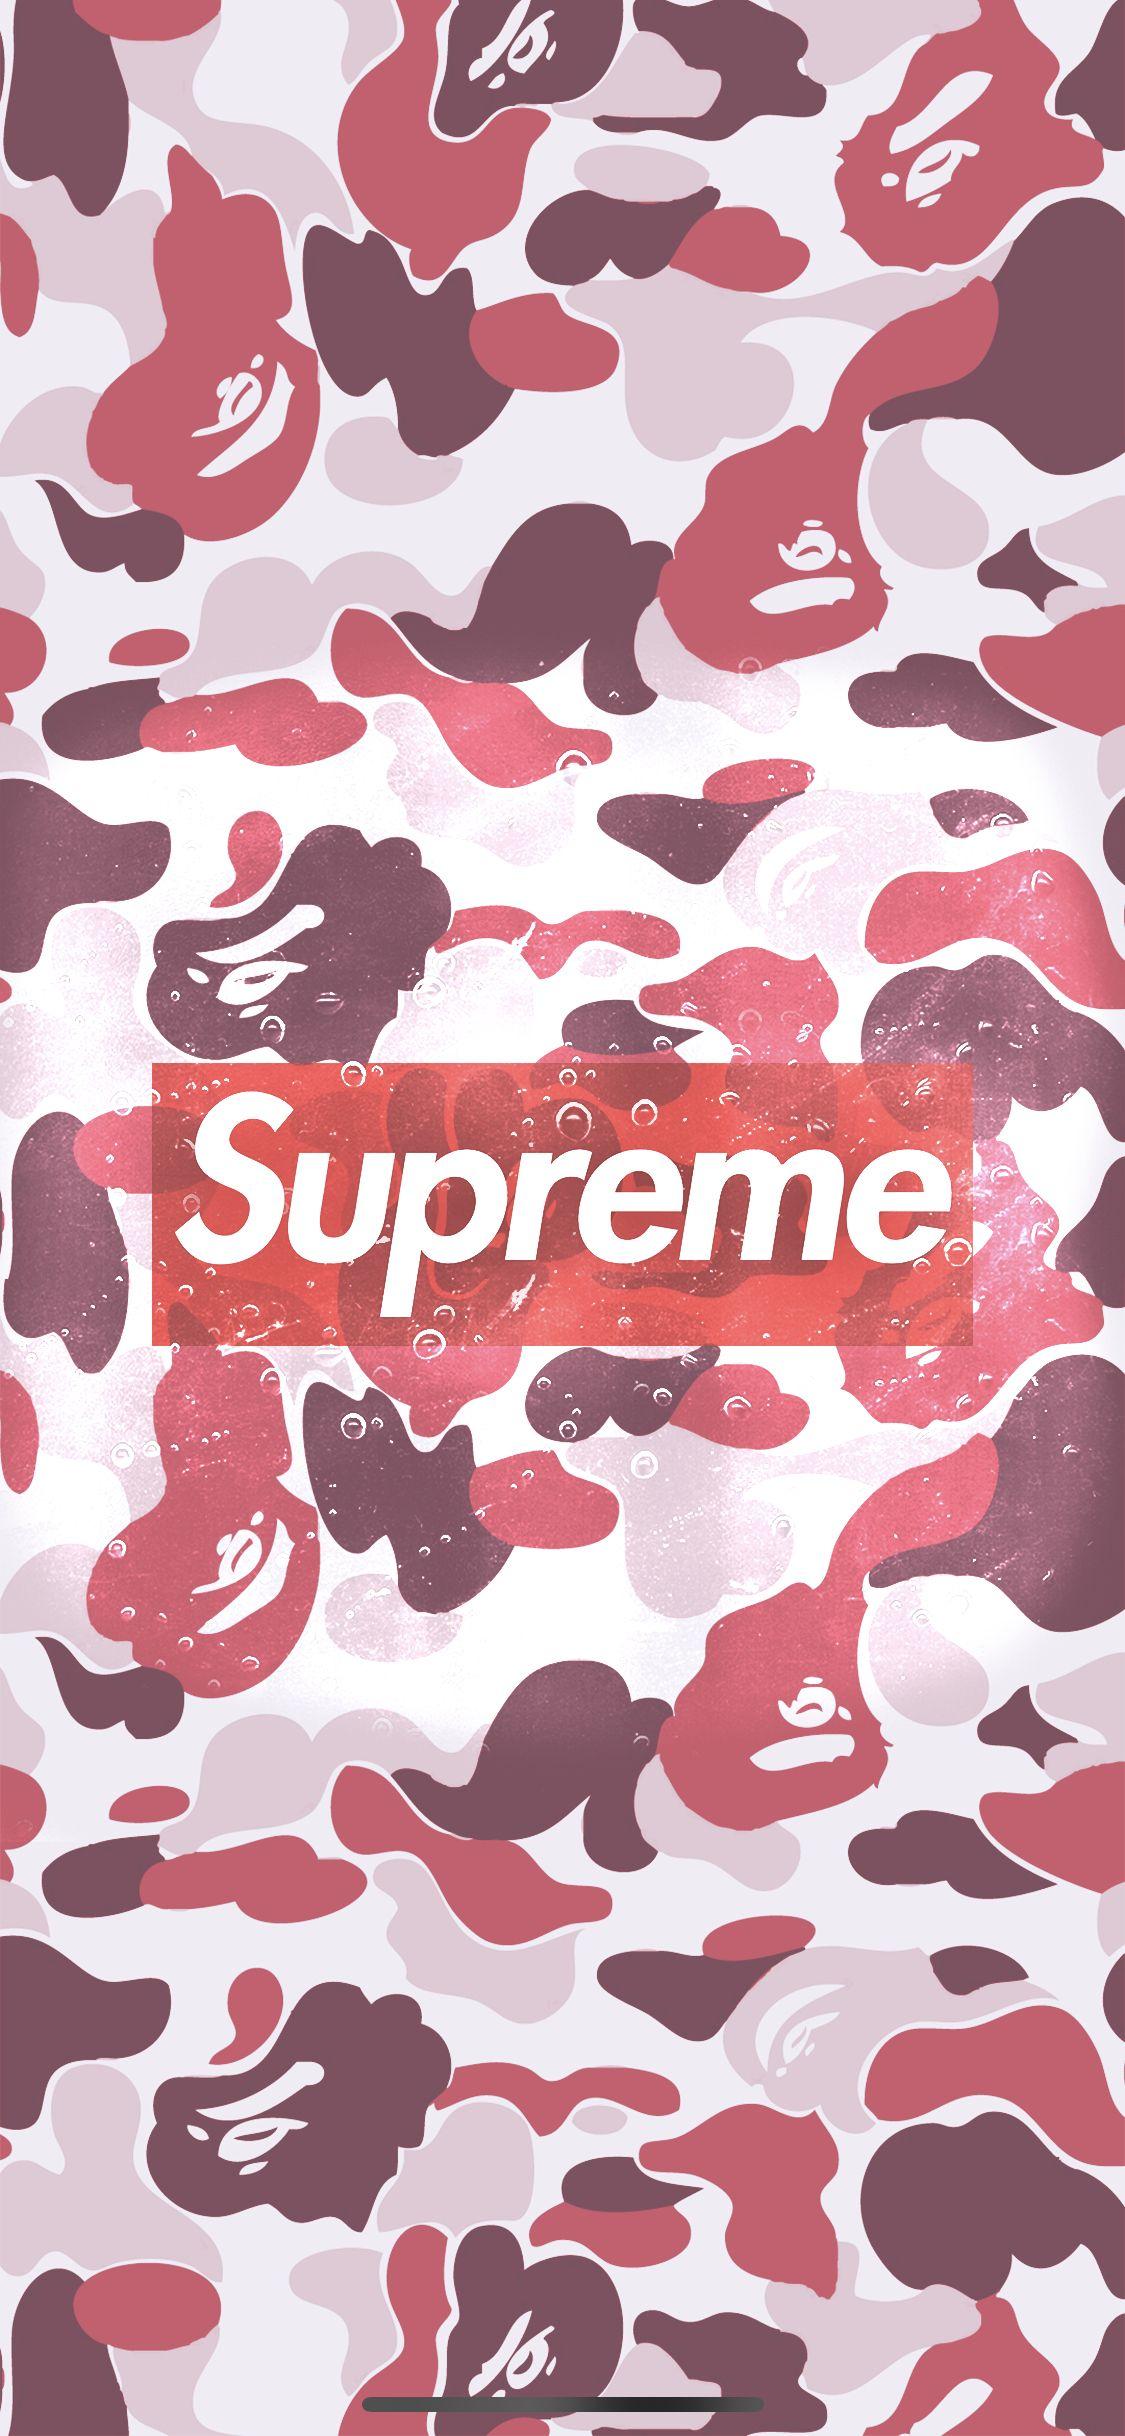 Supreme IPhone XR Wallpapers - Wallpaper Cave  Supreme wallpaper, Supreme  iphone wallpaper, Sports wallpapers